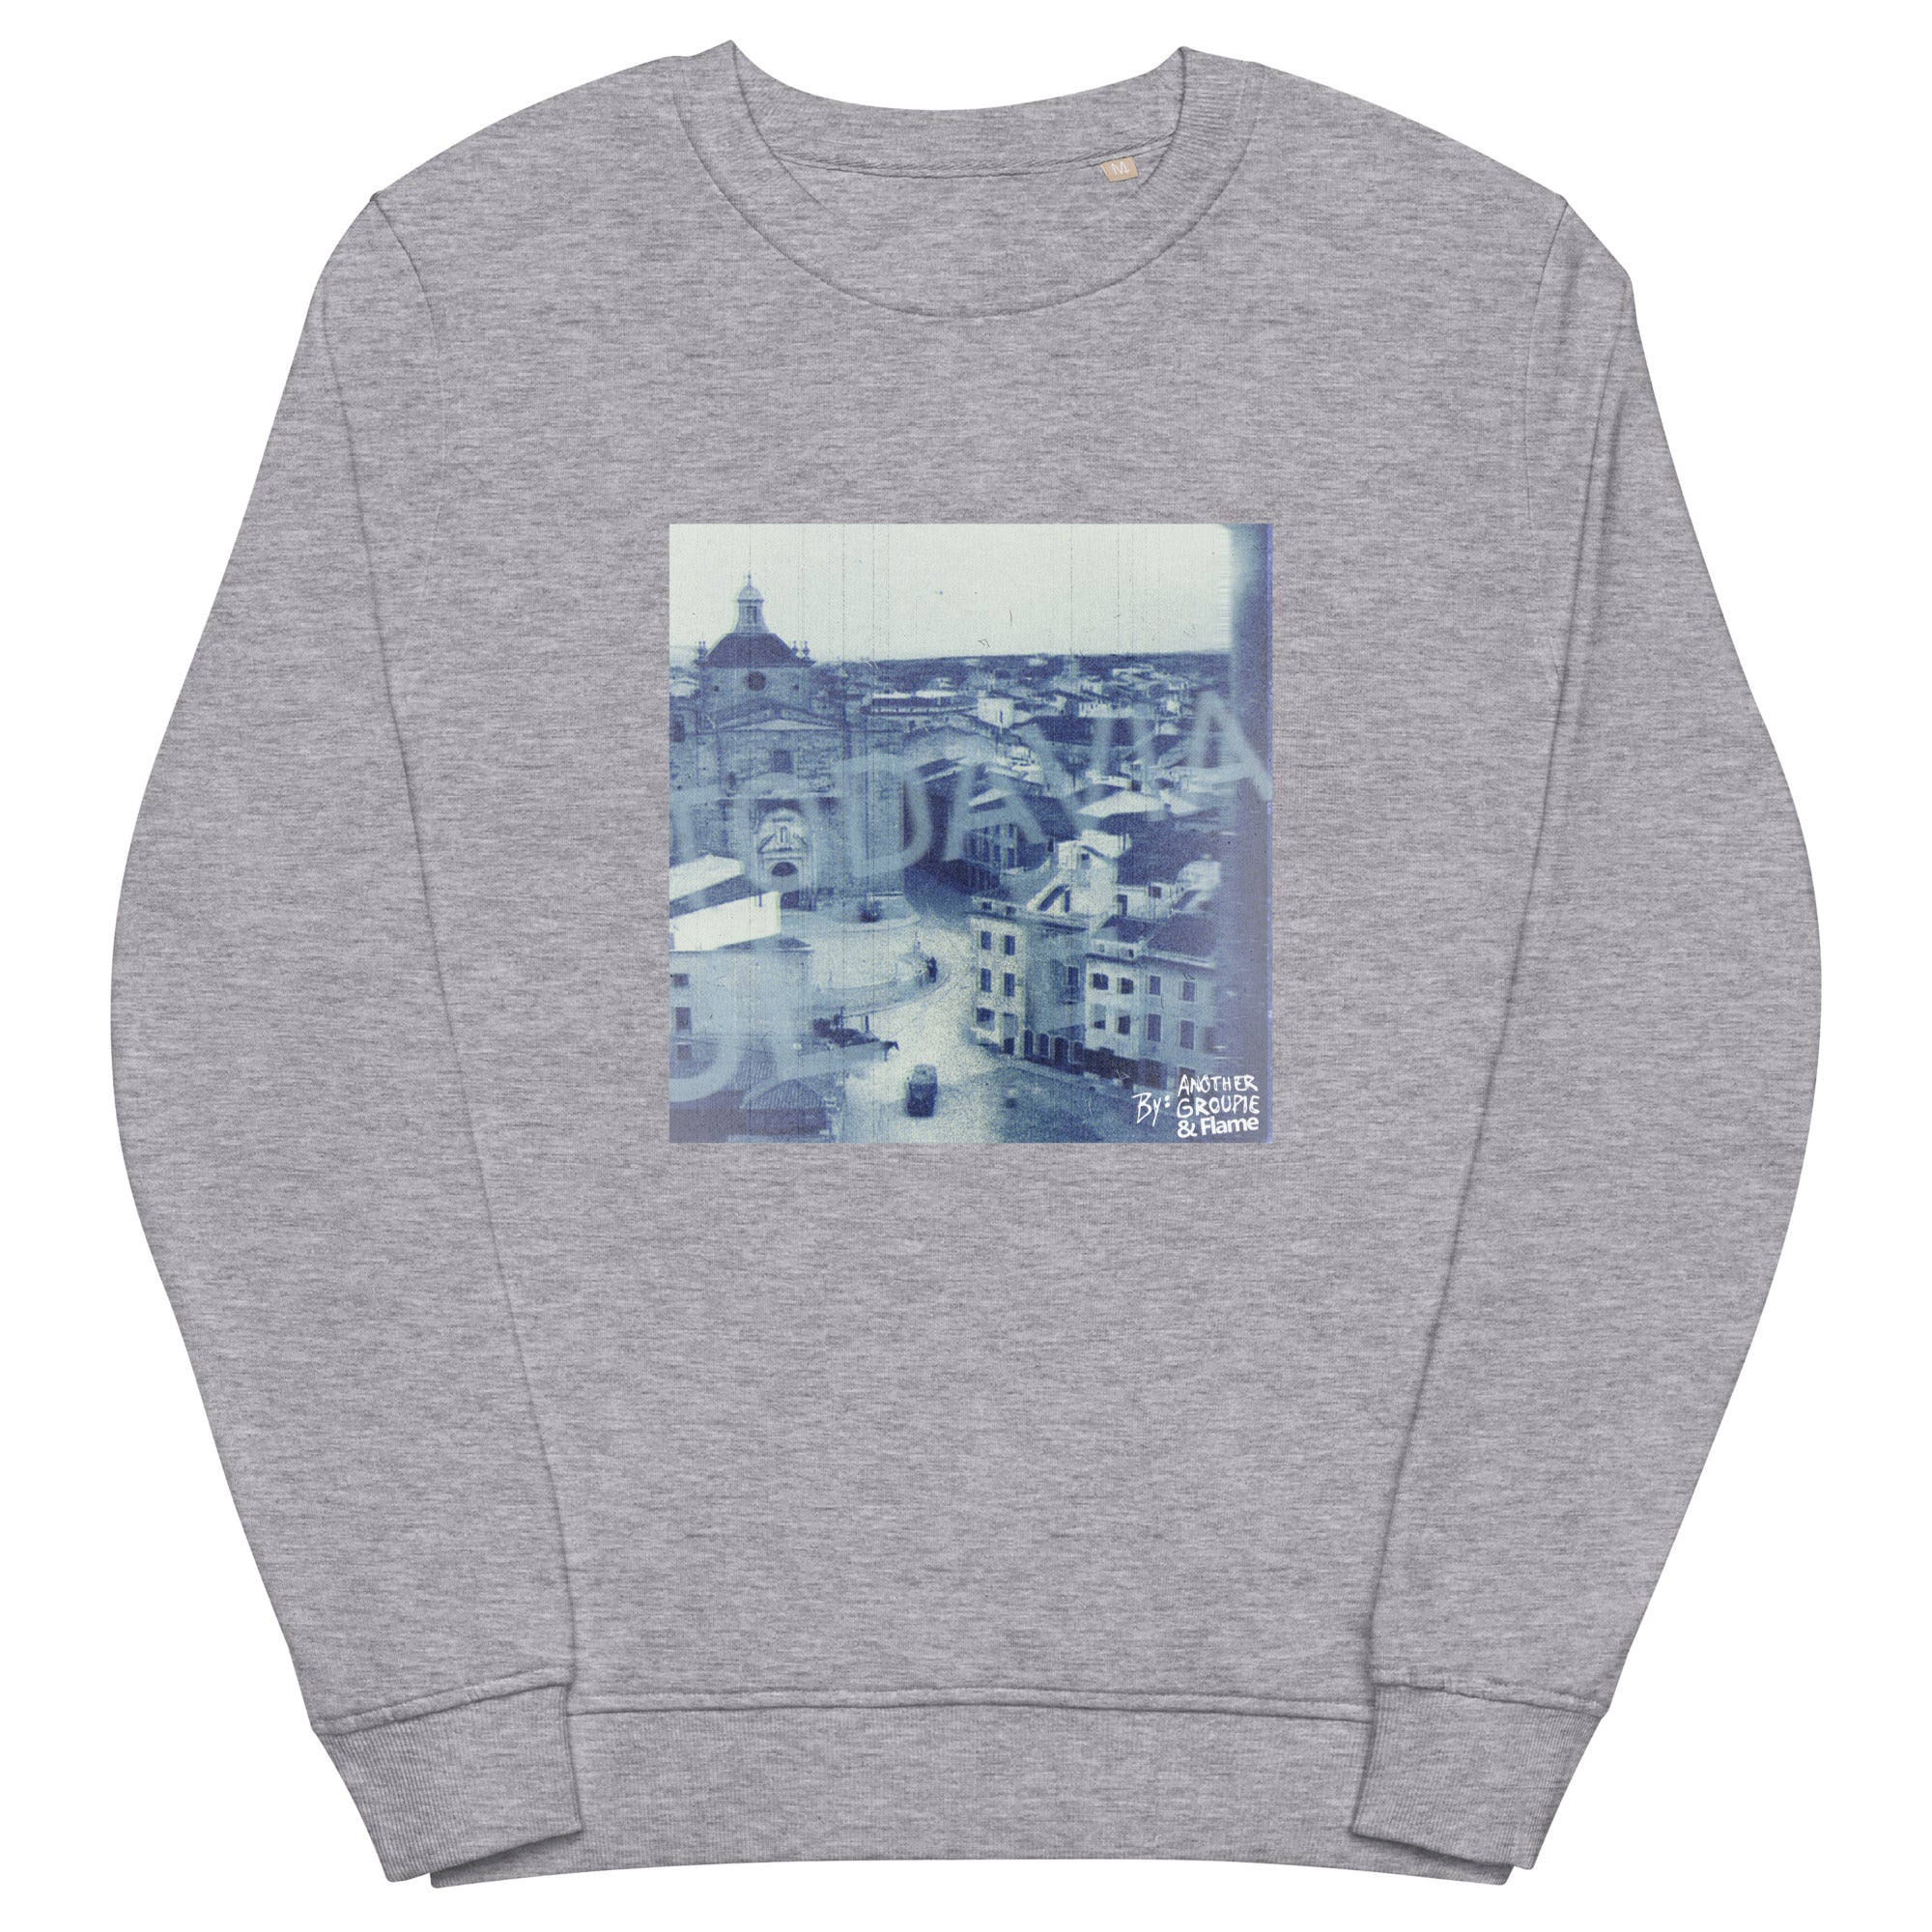 Sudadera orgánica diseño "Old Town" by Flame